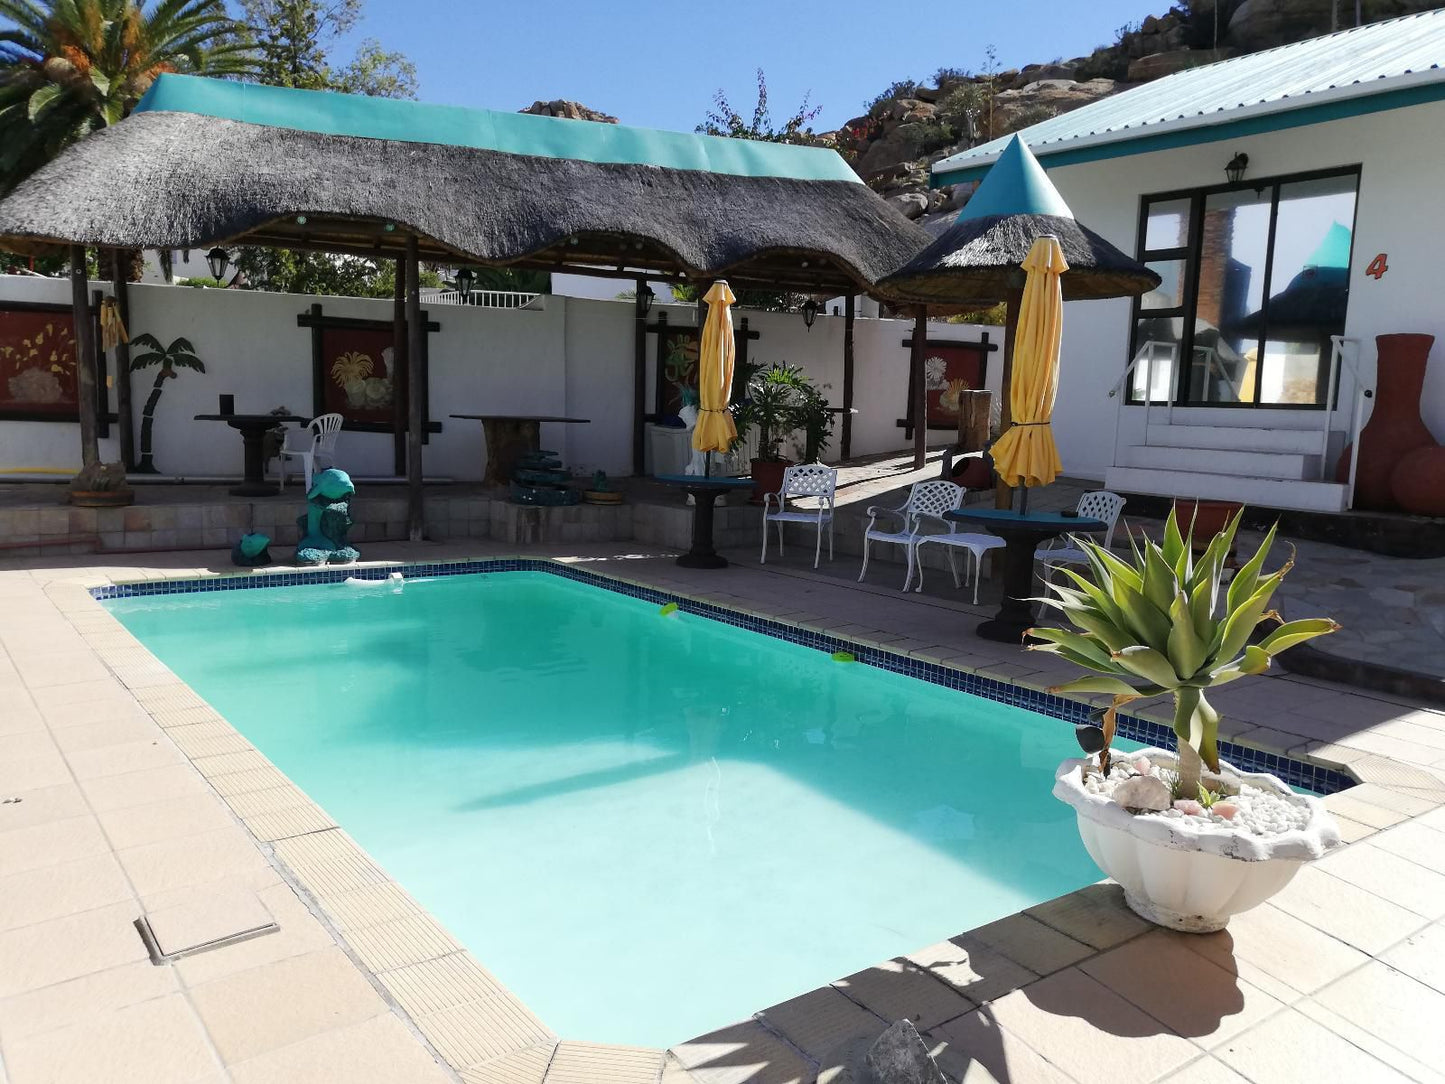 Blue Diamond Lodge Springbok Springbok Northern Cape South Africa House, Building, Architecture, Swimming Pool